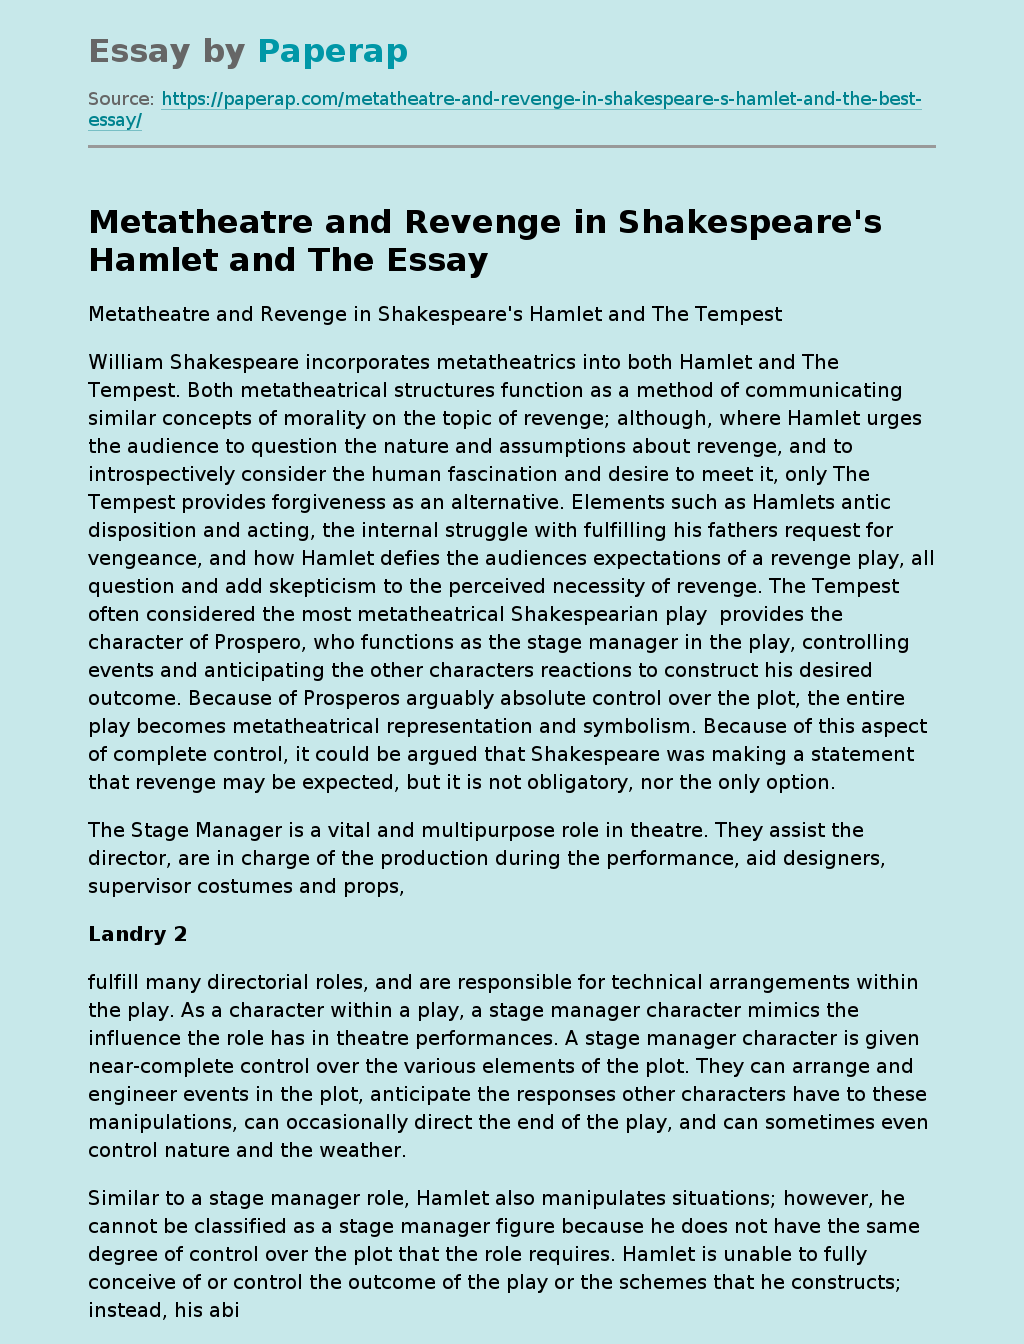 Metatheatre and Revenge in Shakespeare's Hamlet and The